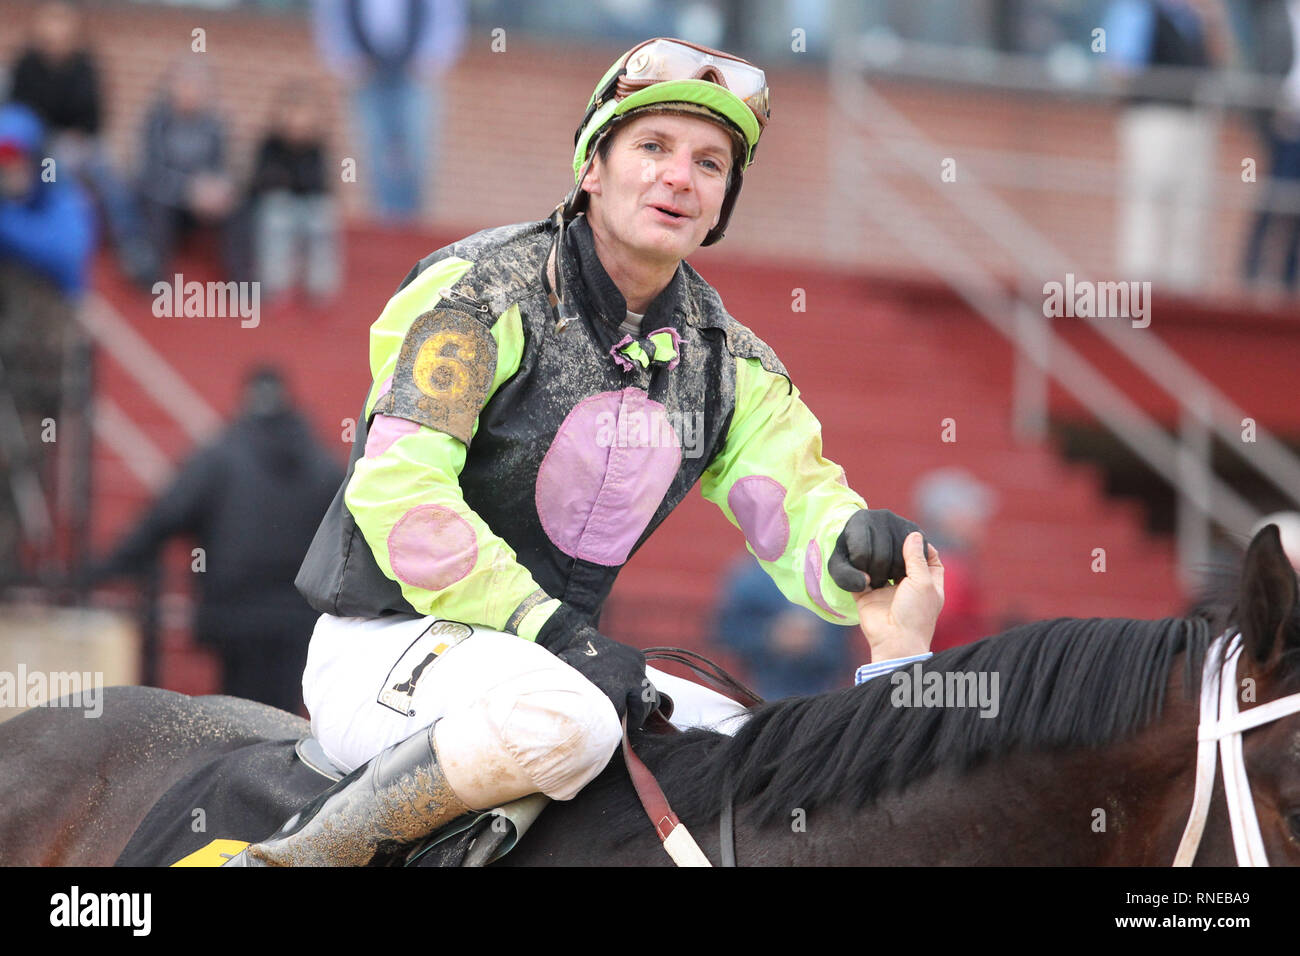 Hot Spring, AR, USA. 18th Feb, 2019. Feburary 18, 2019: Winning jockey Terry Thompson aboard Super Steed (6) after winning the Southwest Stakes at Oaklawn Park in Hot Spring, AR on February 18, 2019. © Justin Manning/Eclipse Sportswire/CSM/Alamy Live News Stock Photo